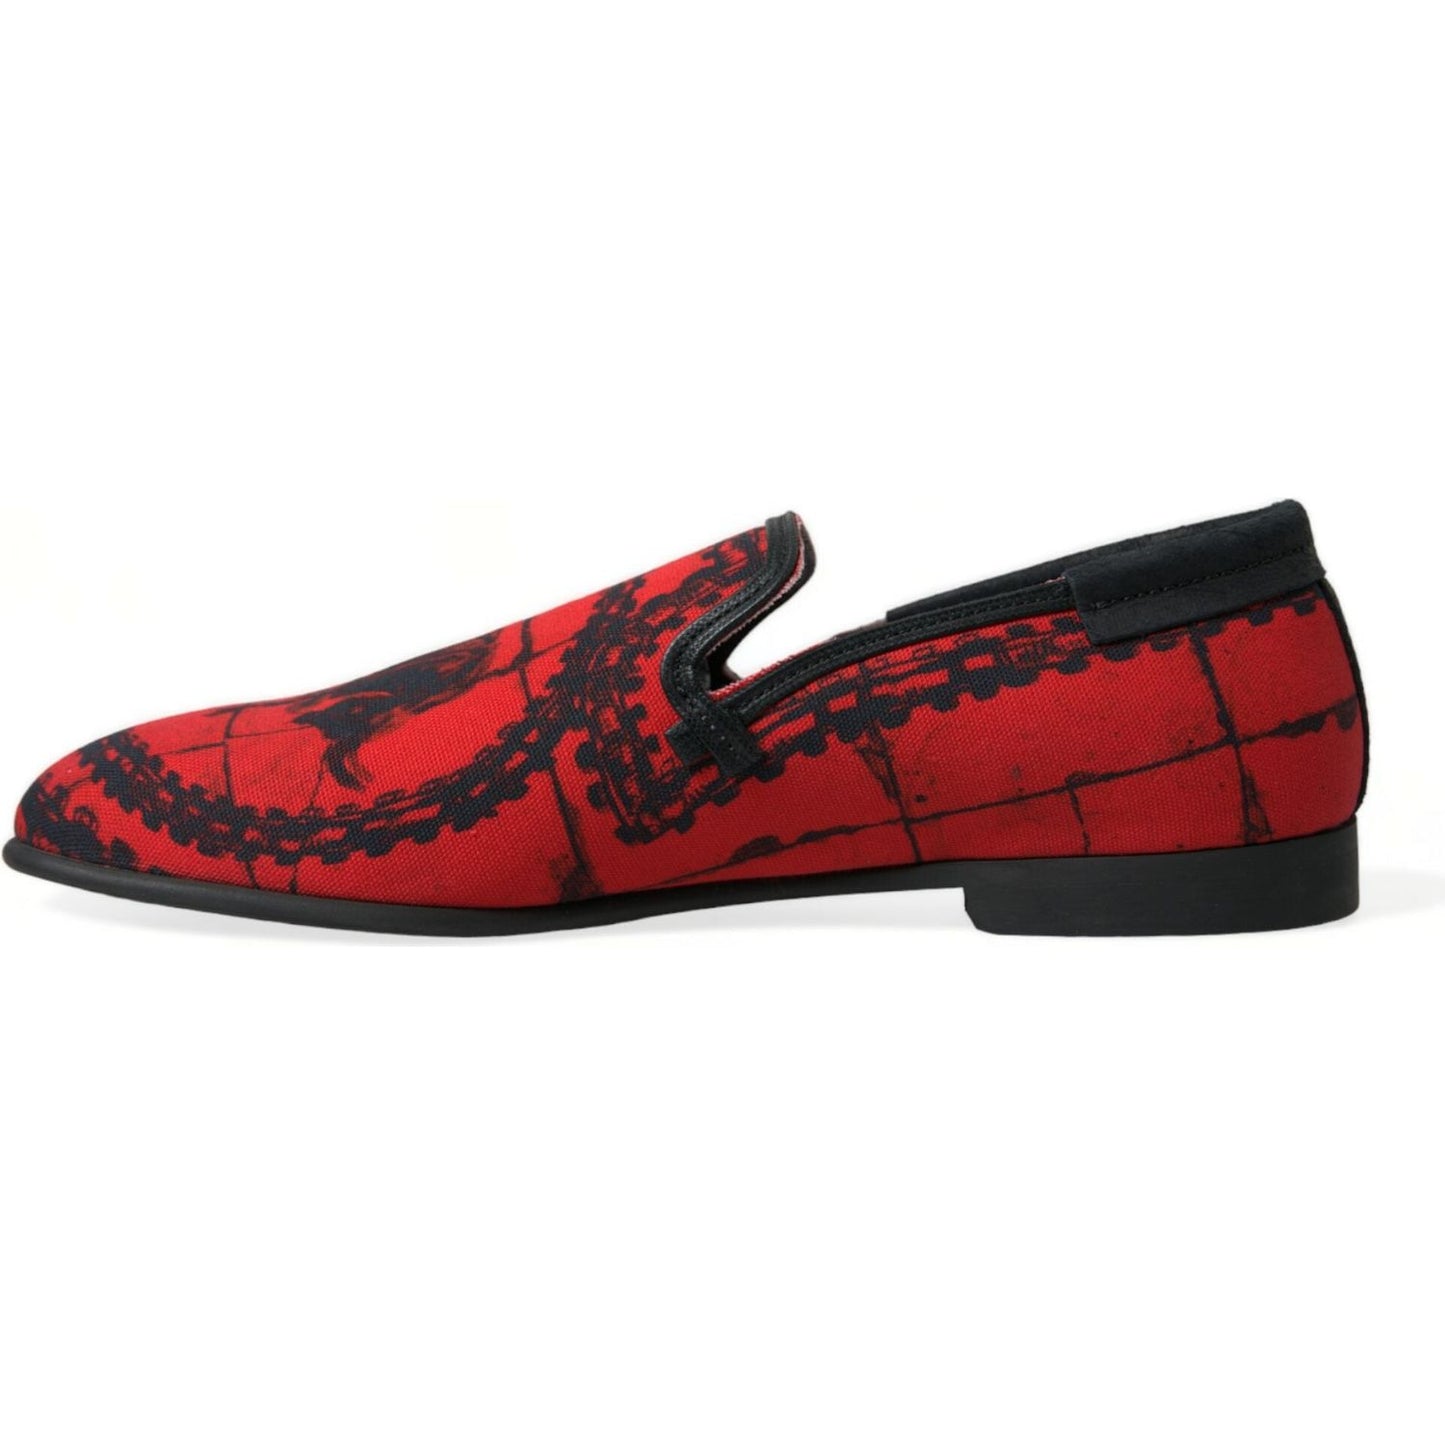 Torero-Inspired Luxe Red & Black Loafers